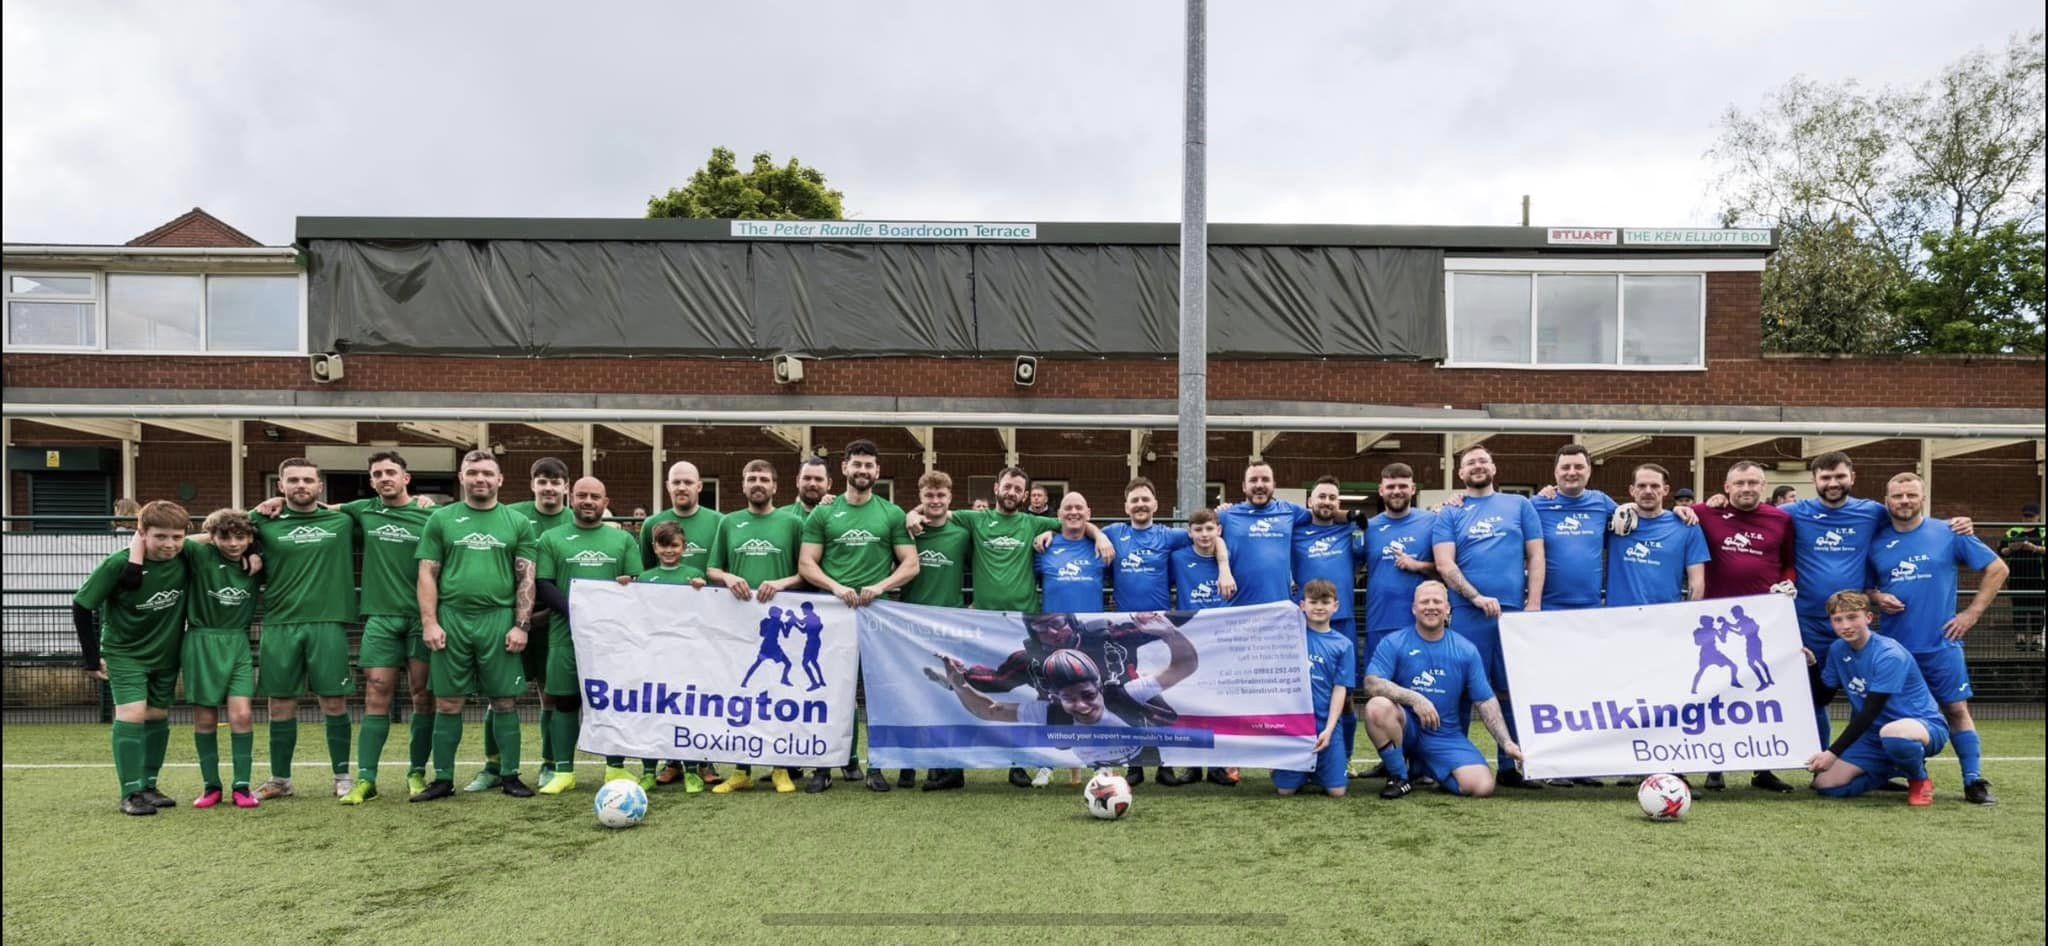 Image shows two football teams arm in arm on football pitch holding up a brainstrust poster. 
Image from Cheryl's charity football match for brainstrust